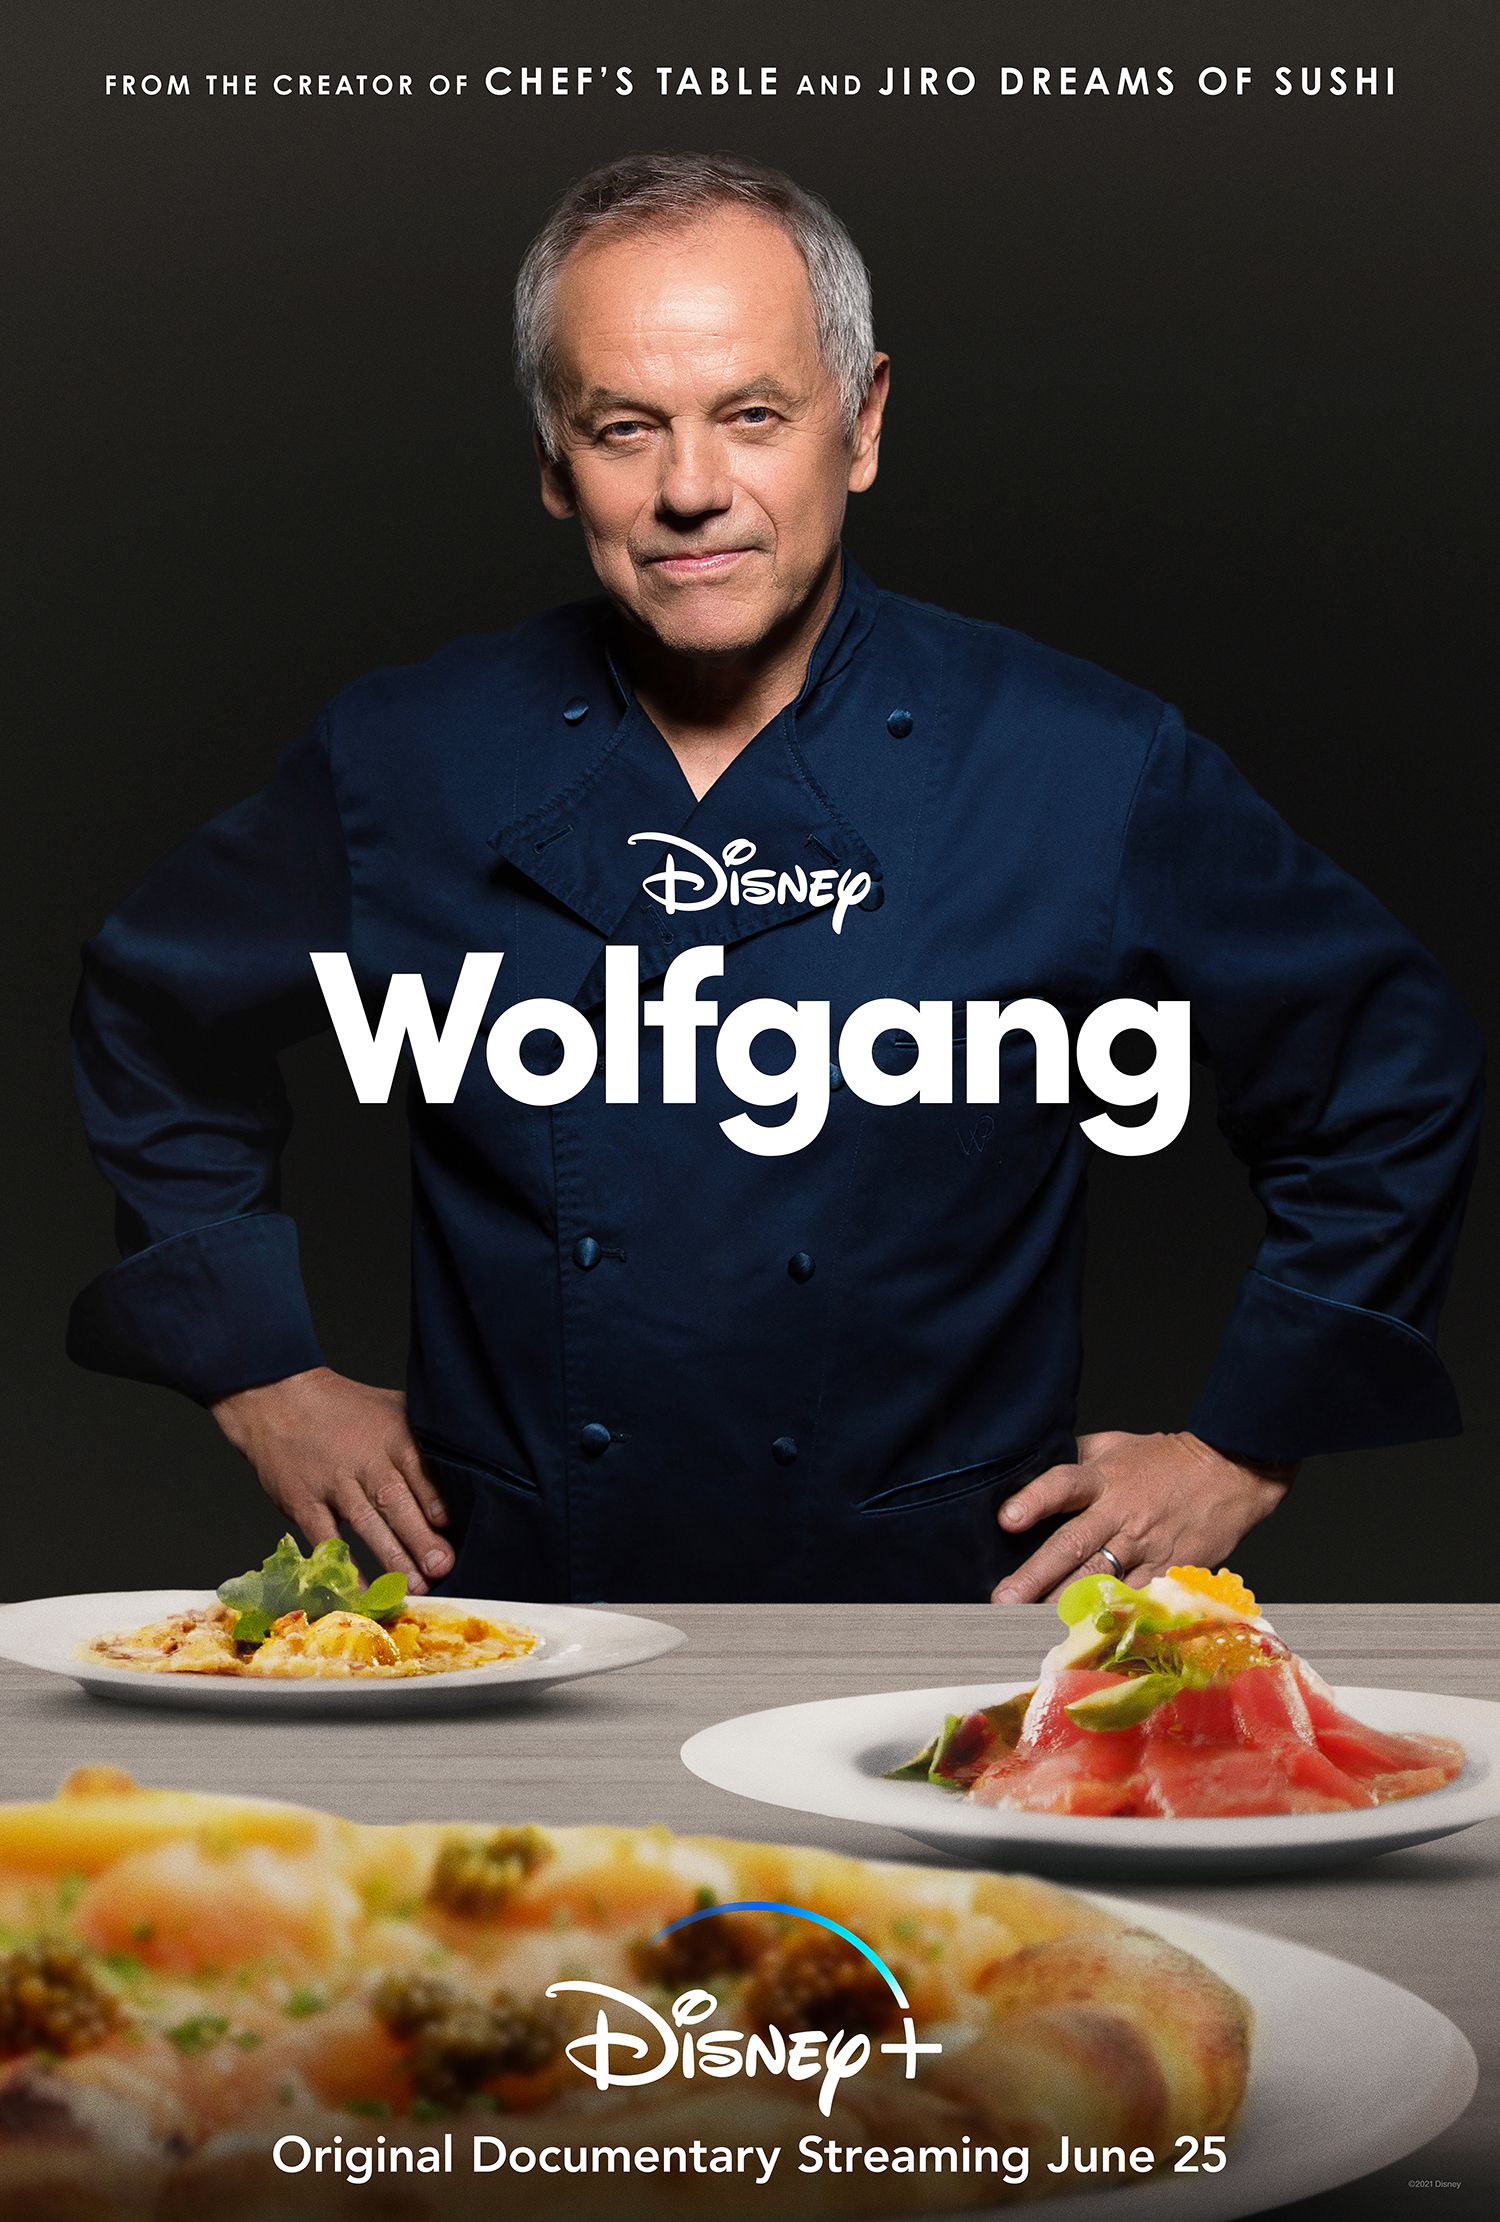 'Wolfgang' Featured Documentary Set to Premiere on Disney+ This Summer